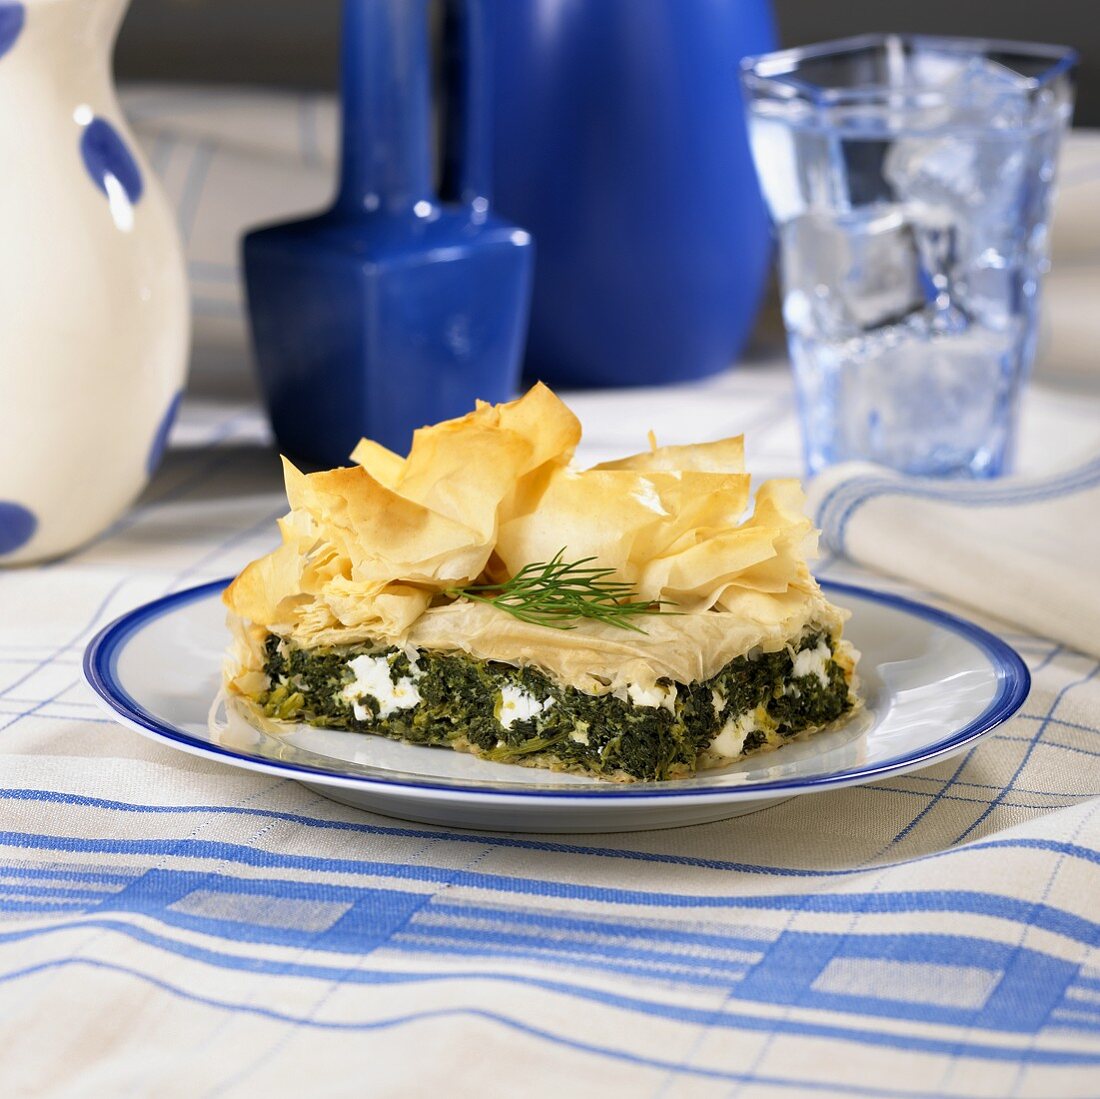 A Piece of Spinach and Feta Pie in Phyllo (Spanakopita)